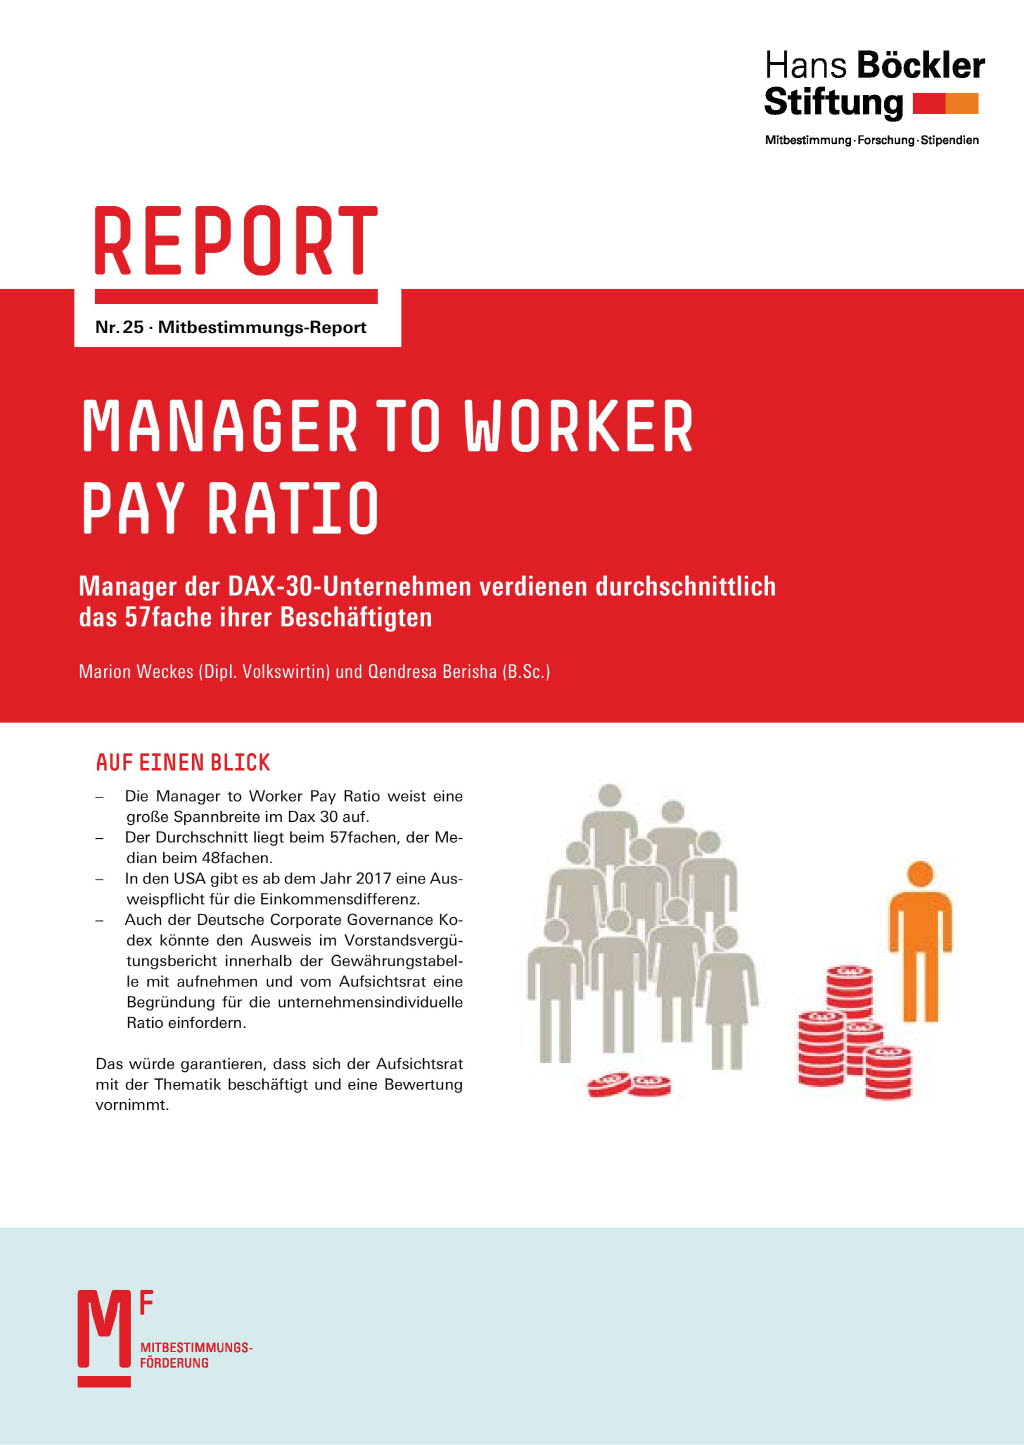 Manager to Worker Pay Ratio